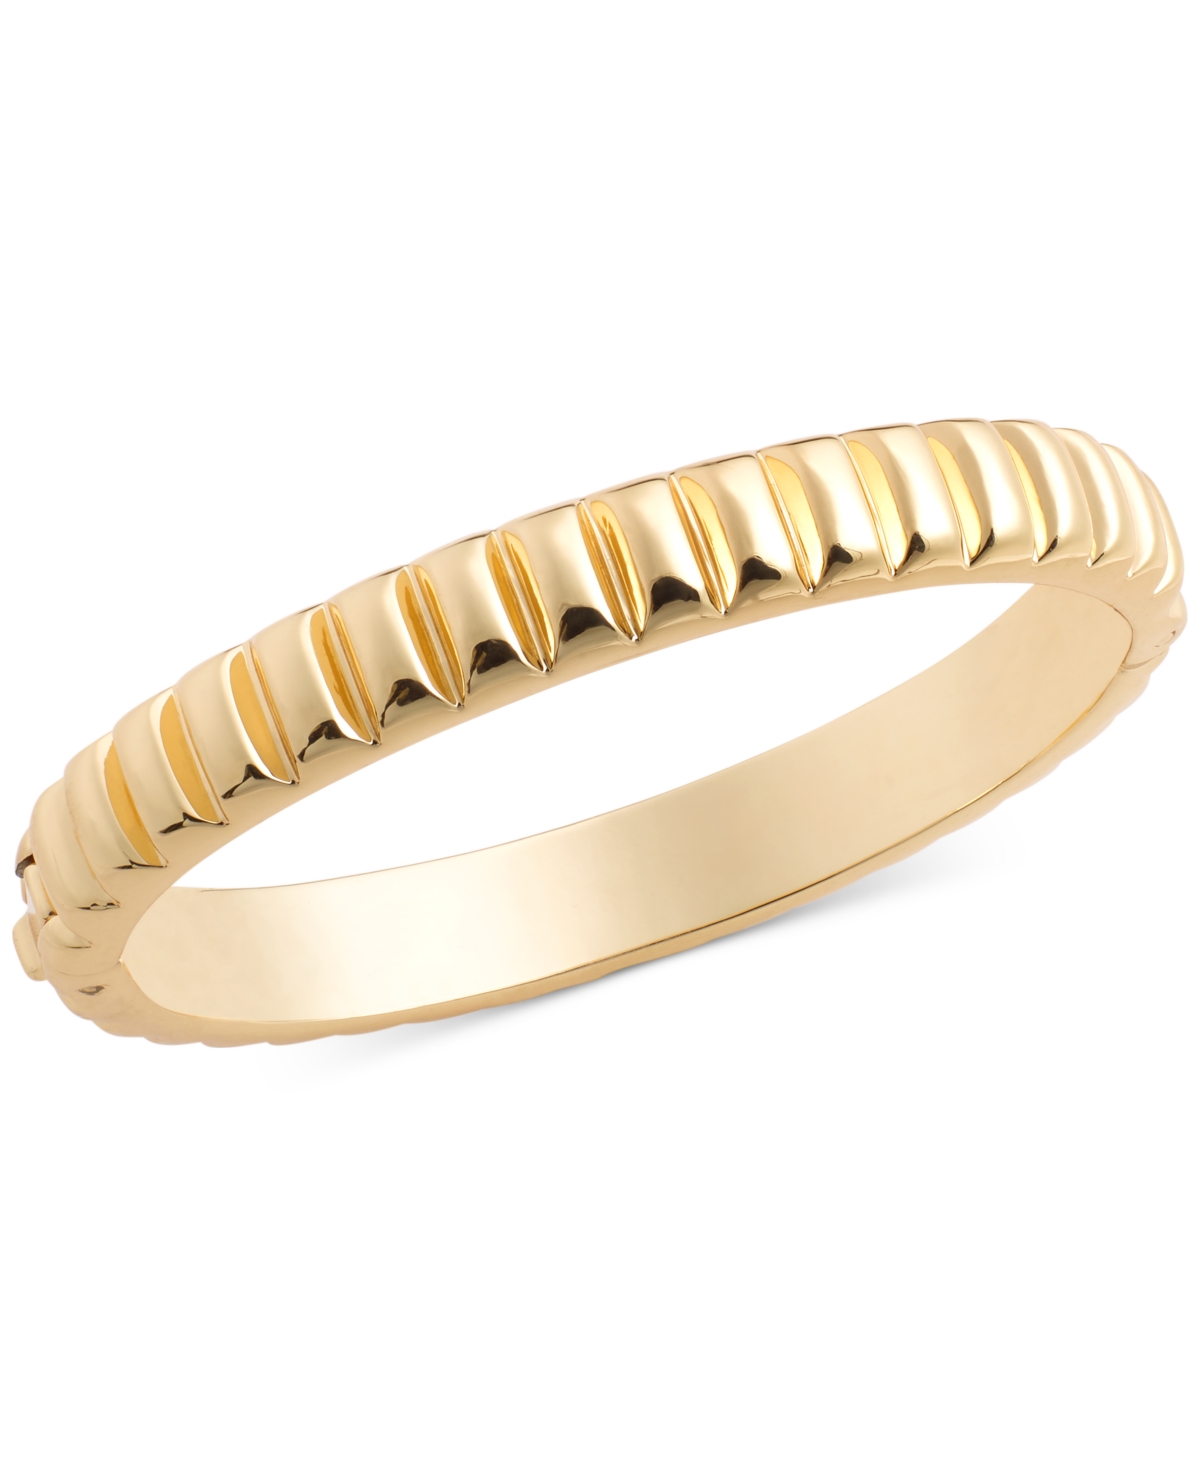 Gold-Tone Thin Textured Bangle Bracelet, Created for Macy's - Gold